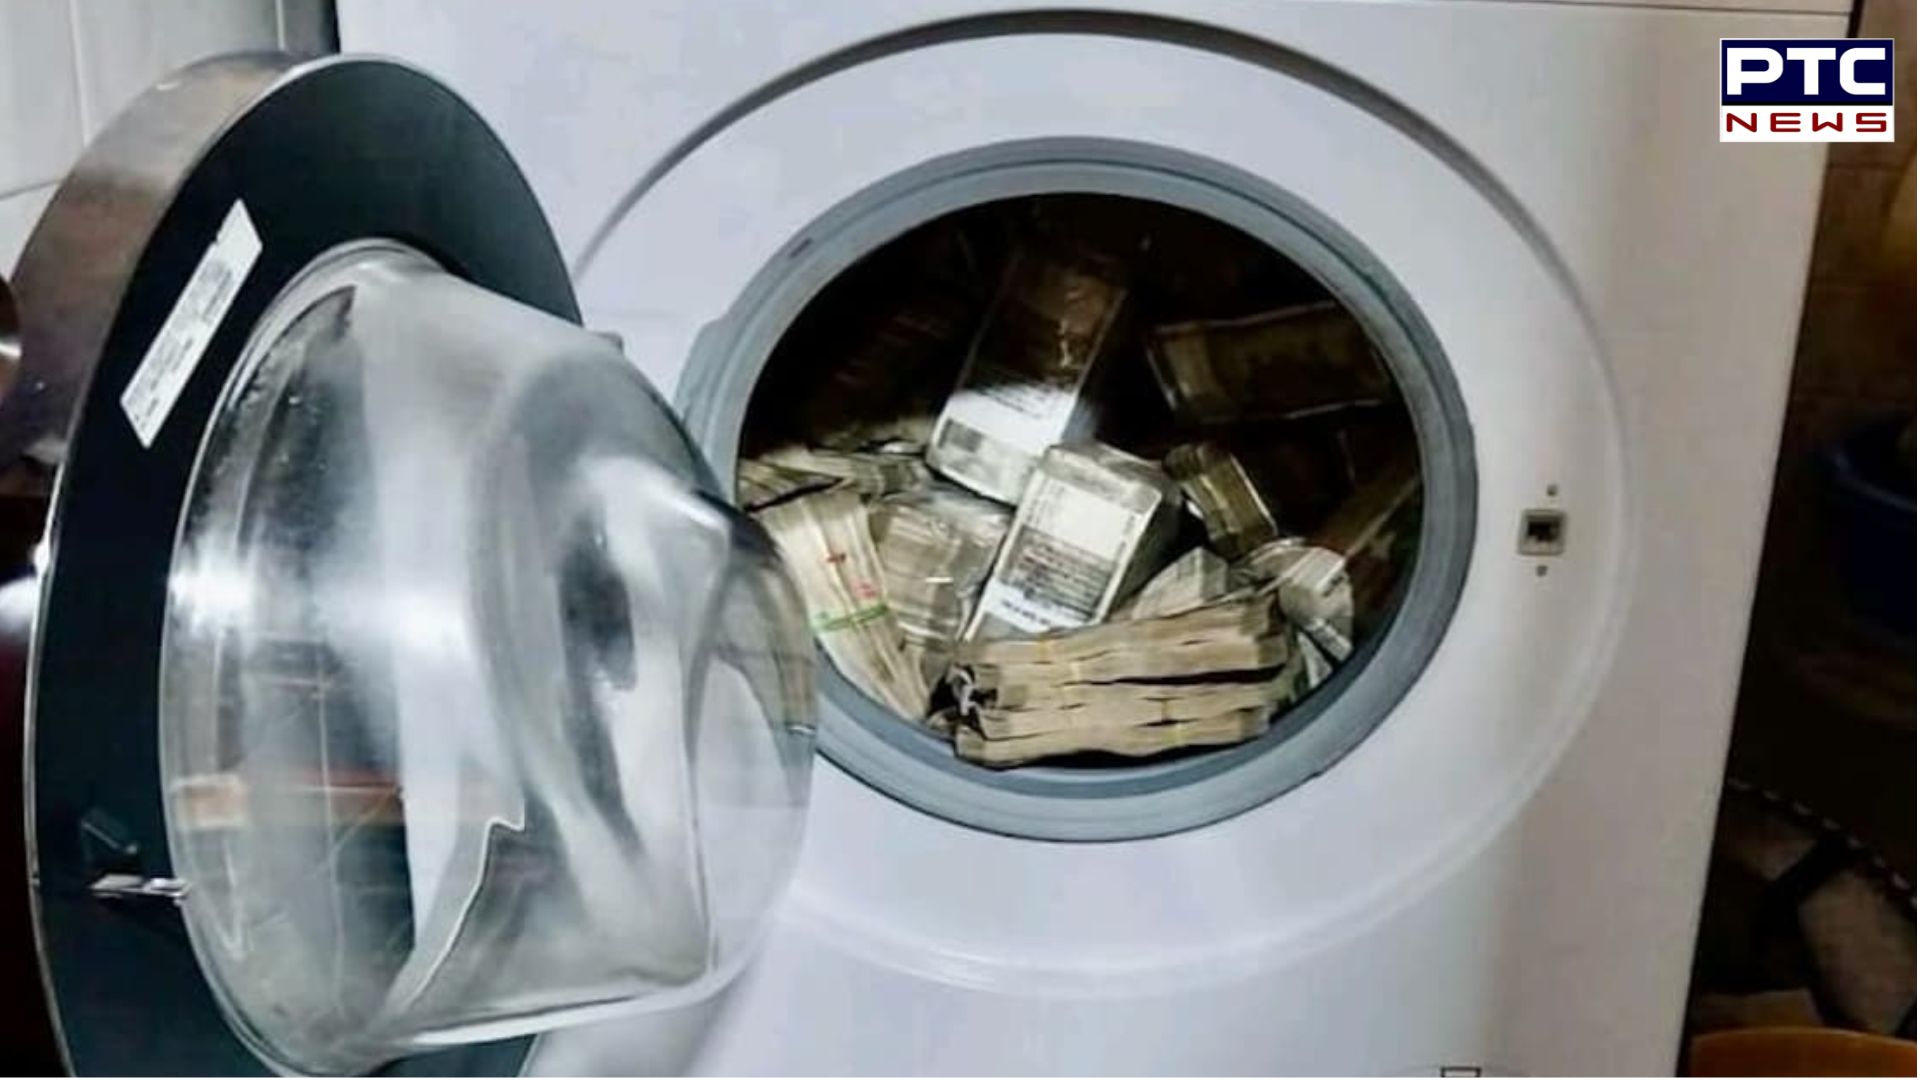 Foreign exchange law violation:  ED recovers Rs 2.54 crore concealed in washing machine